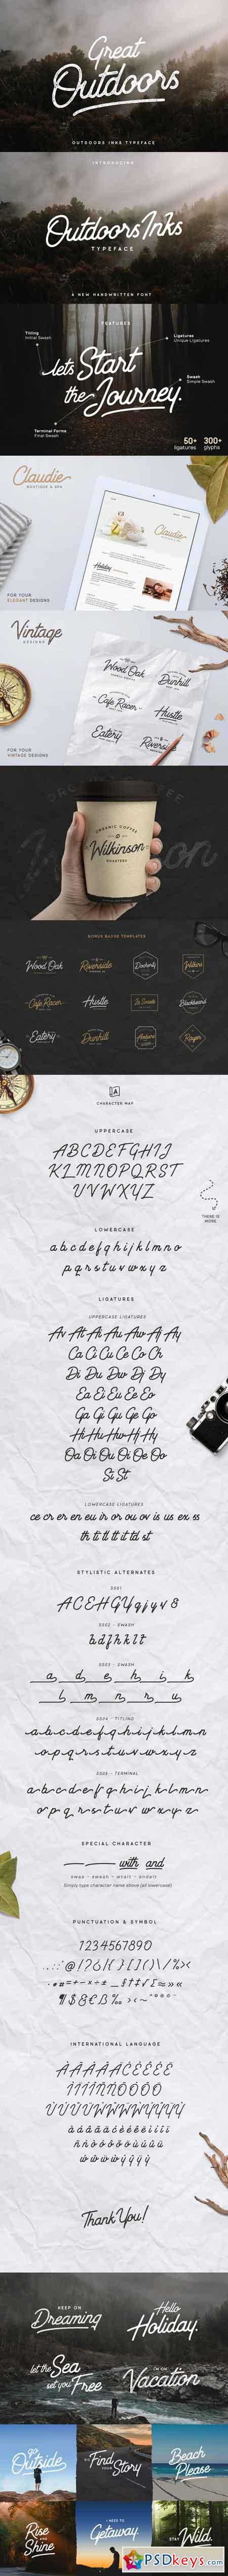 Outdoors Inks Typeface - 4 Styles 730102